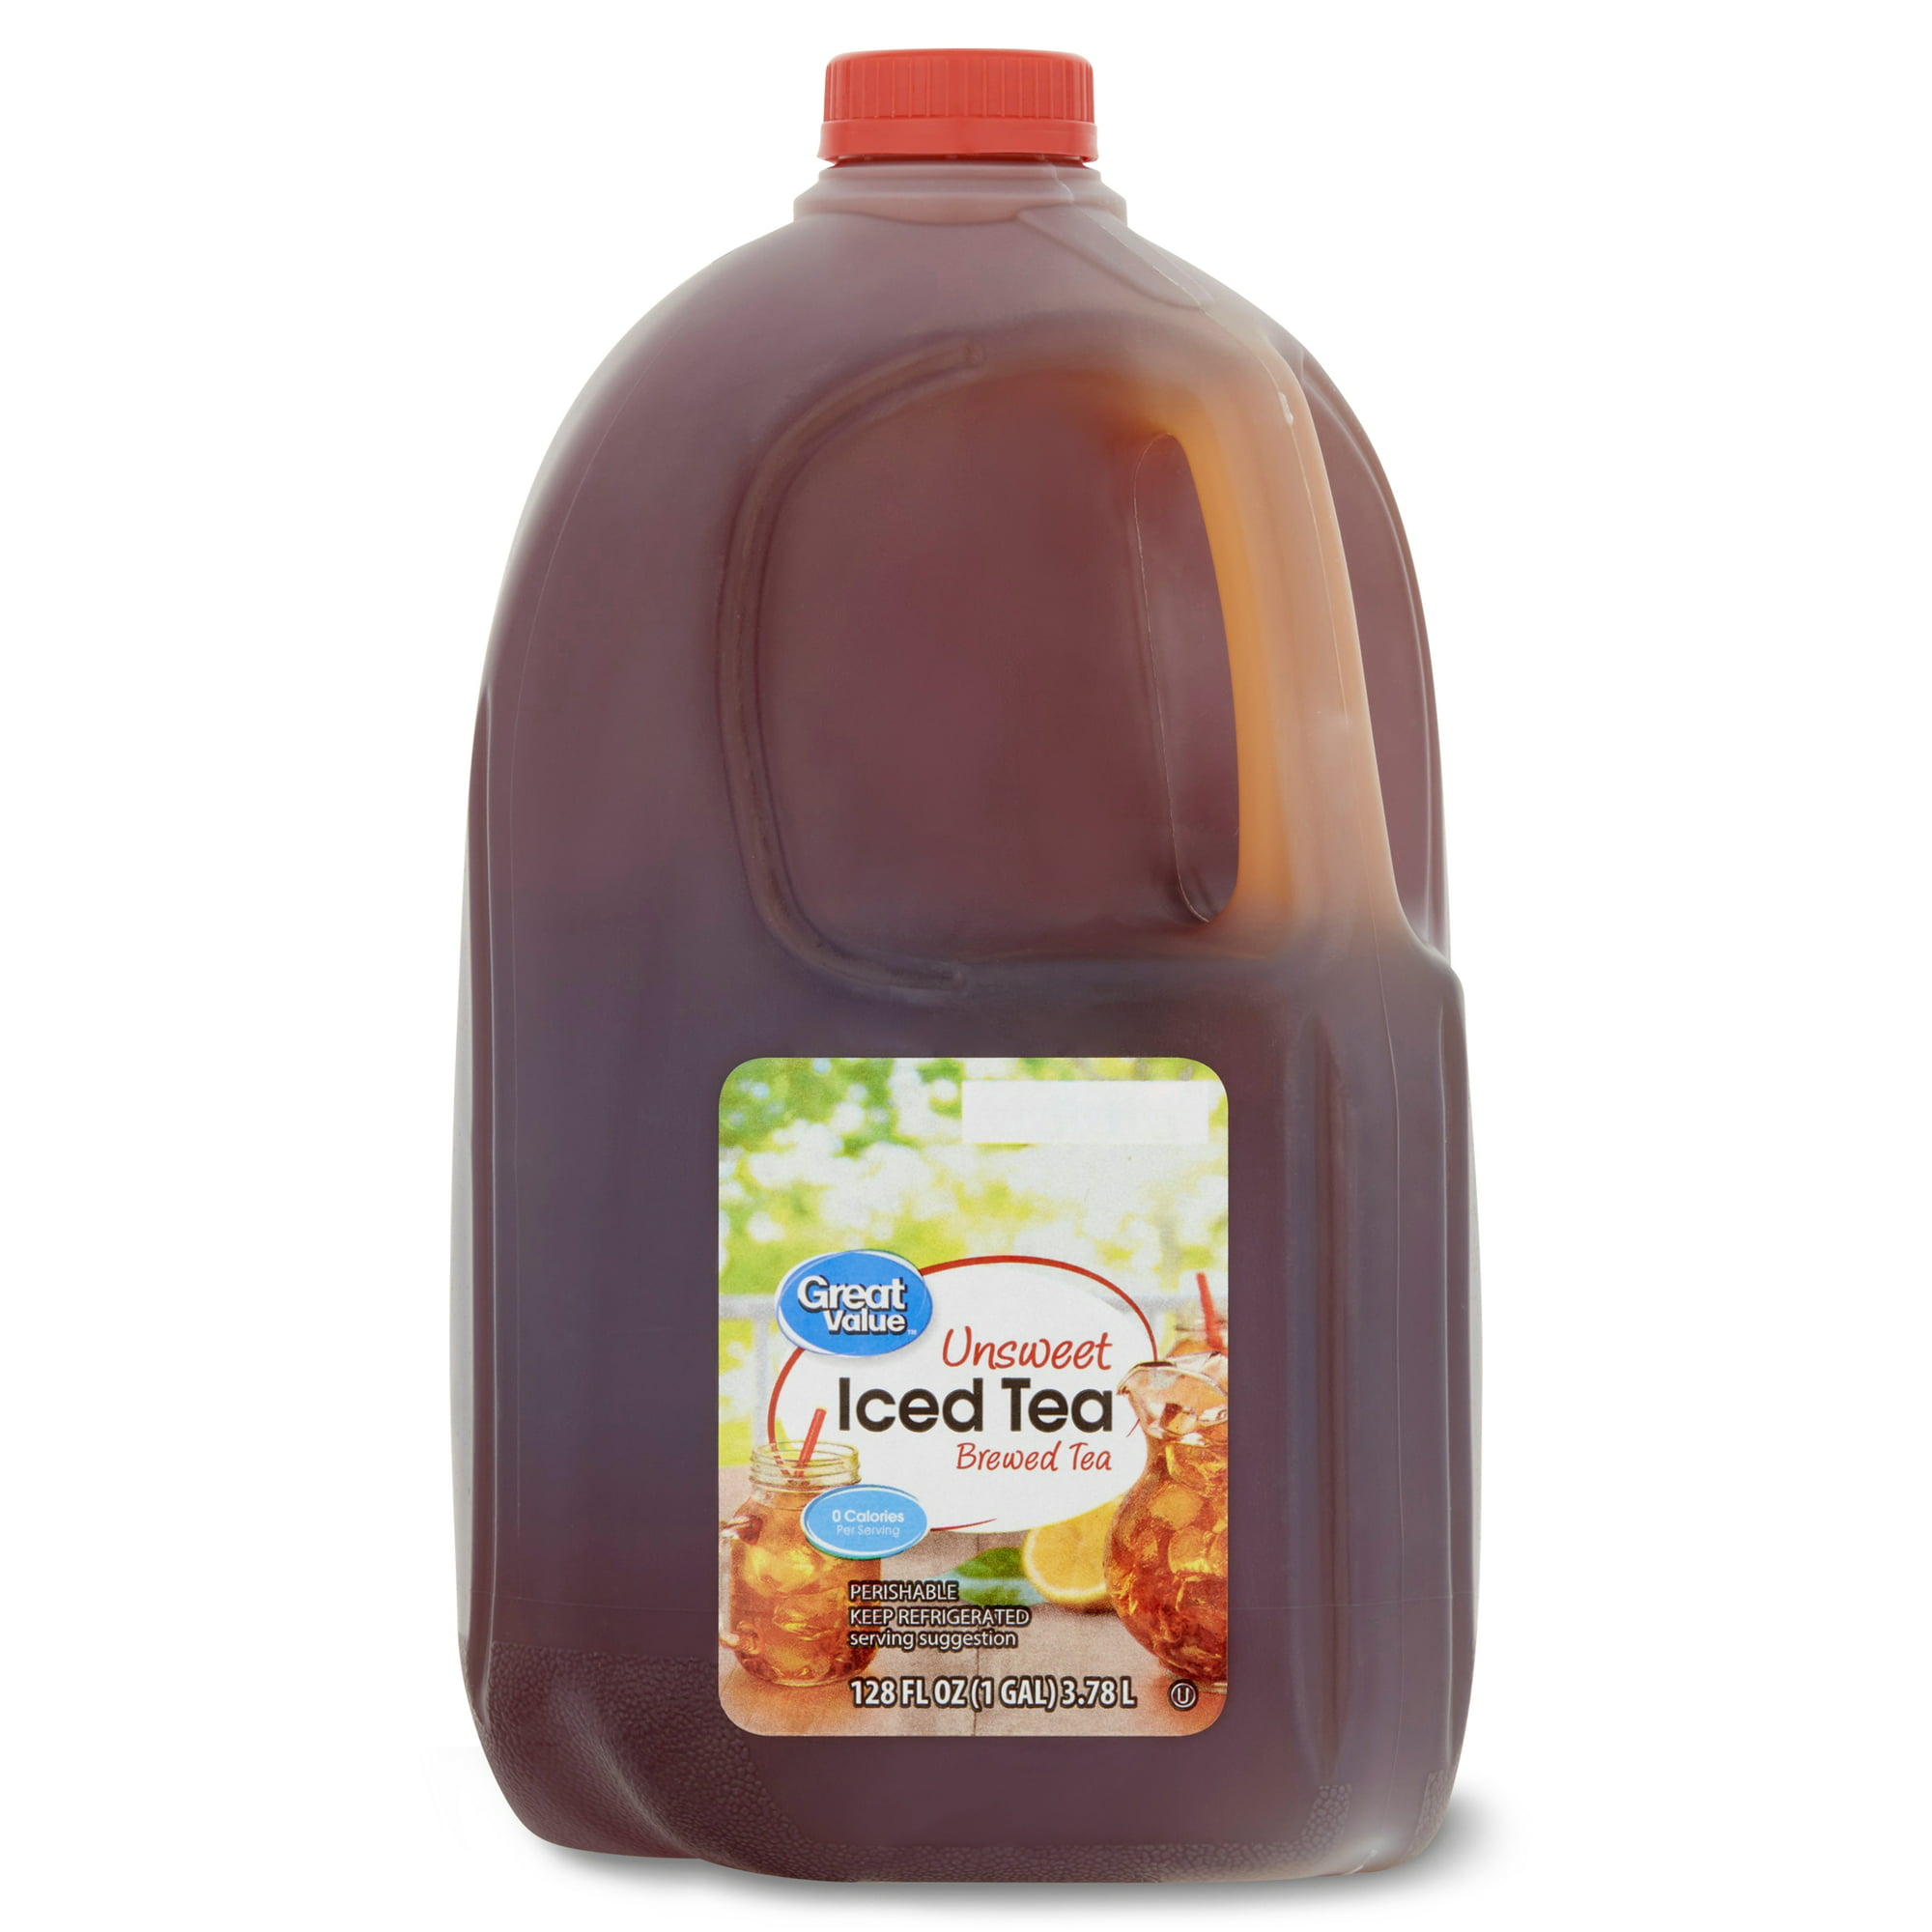 Great-Value-Unsweet-Brewed-Iced-Tea-128-Fl-Oz-Bottle_9a3948a4-1262-438f-8fad-20c9fb084bfb.a3c6144fa0e9231303c4e1465593354b.jpeg